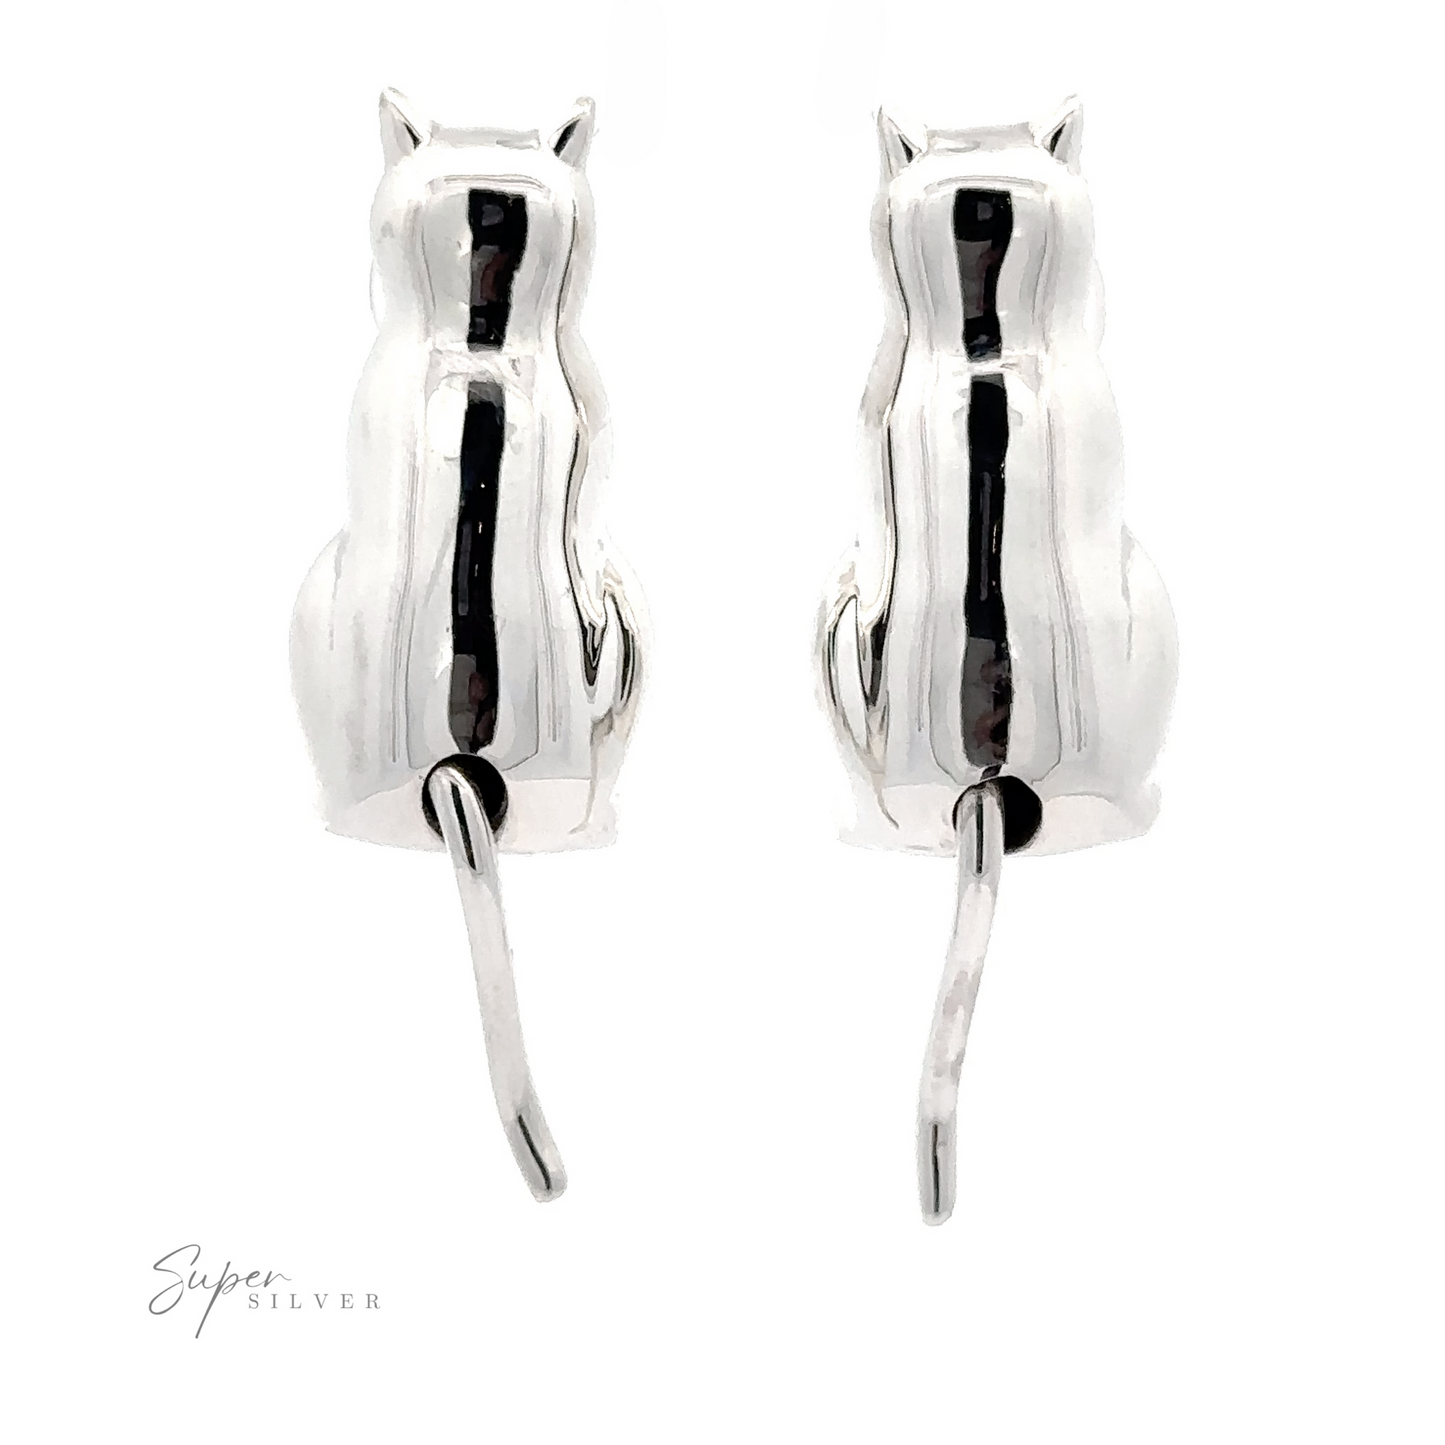 
                  
                    A pair of Silver Cat Earrings with a reflective surface and hook fastenings, displayed on a white background.
                  
                